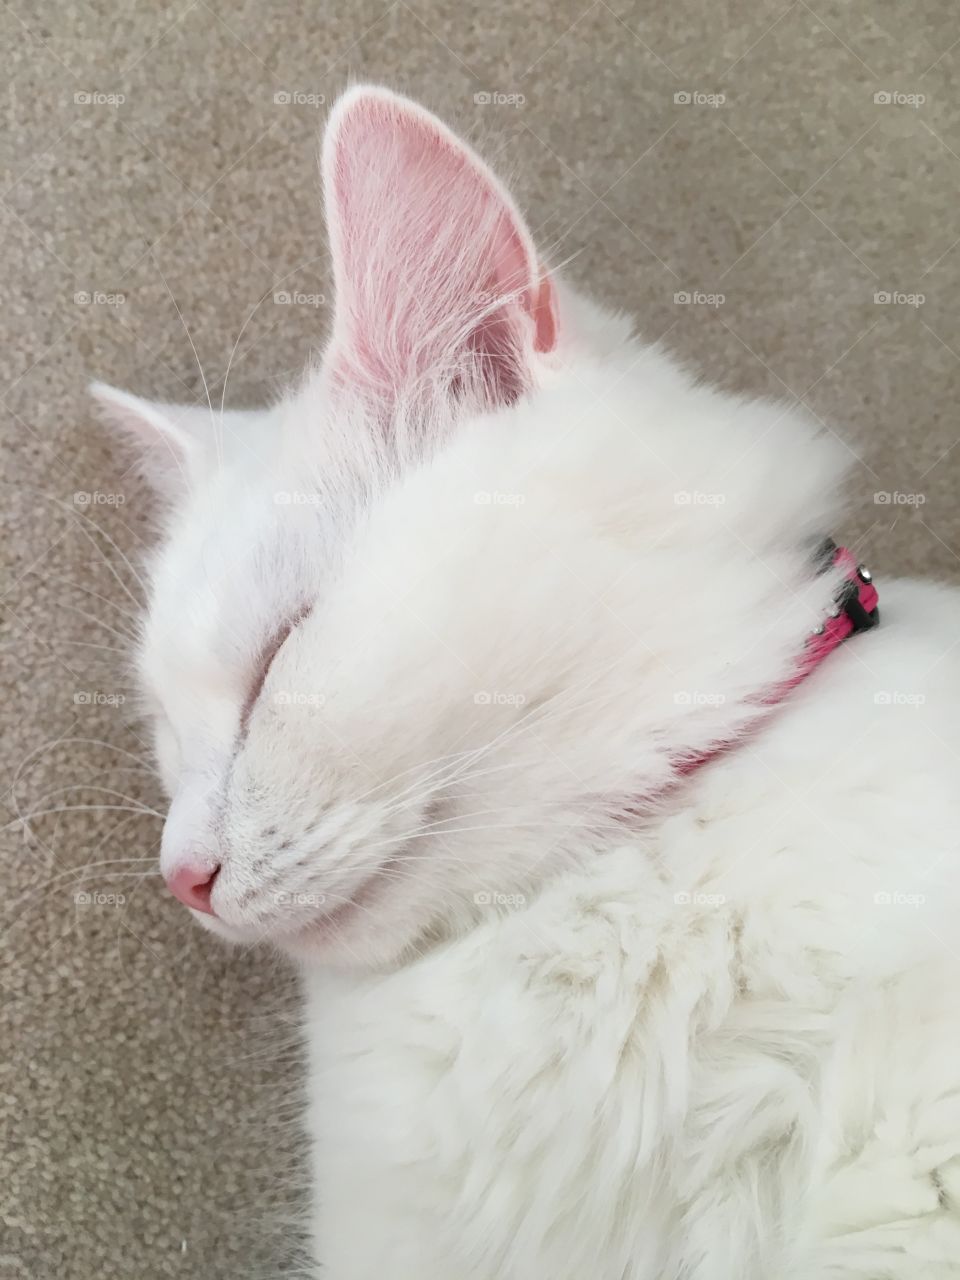 Sleeping white fluffy cat, gorgeous girl. Looks as though she’s smiling in her sleep. Pink ears and nose. 